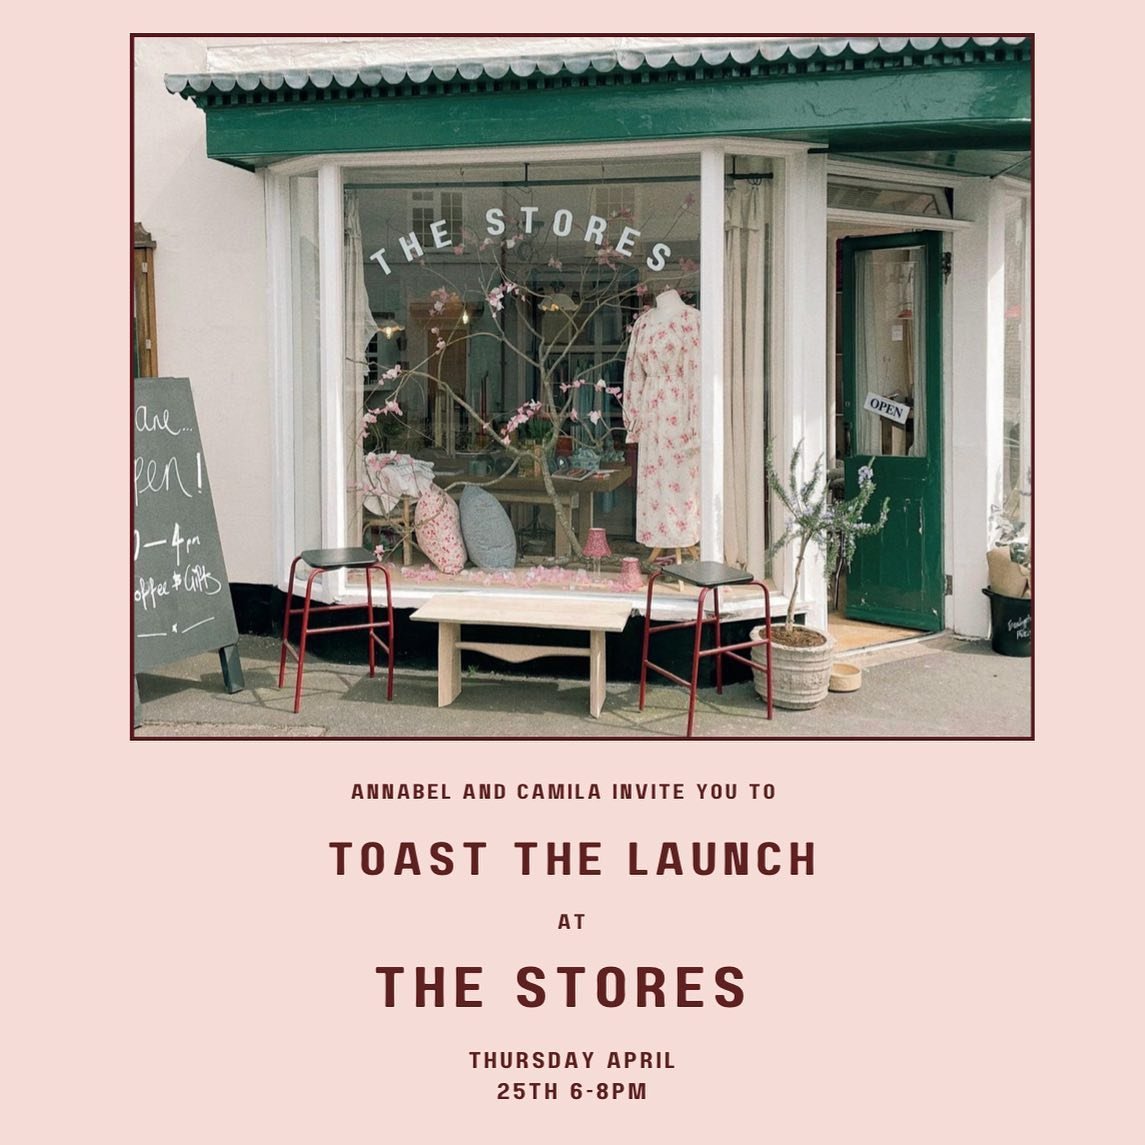 It is with great pleasure and excitement that I am finally sharing the new home of St Palo with you! @thestoreshambledon has unknowingly been a project in the making for my best friend @shopthefavourite and I for the last decade.
Here, we can make to